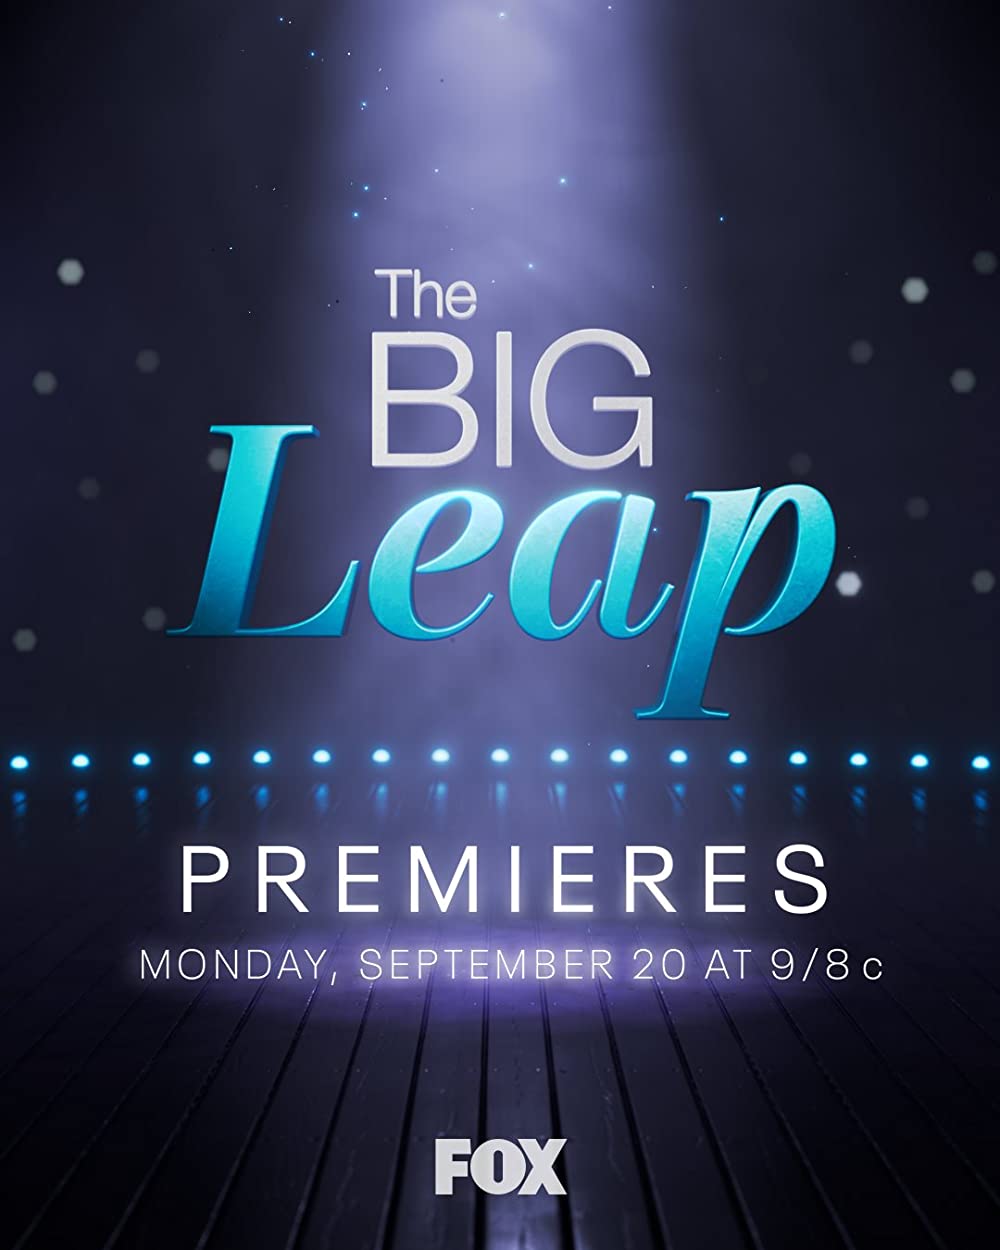 Where to Stream The Big Leap